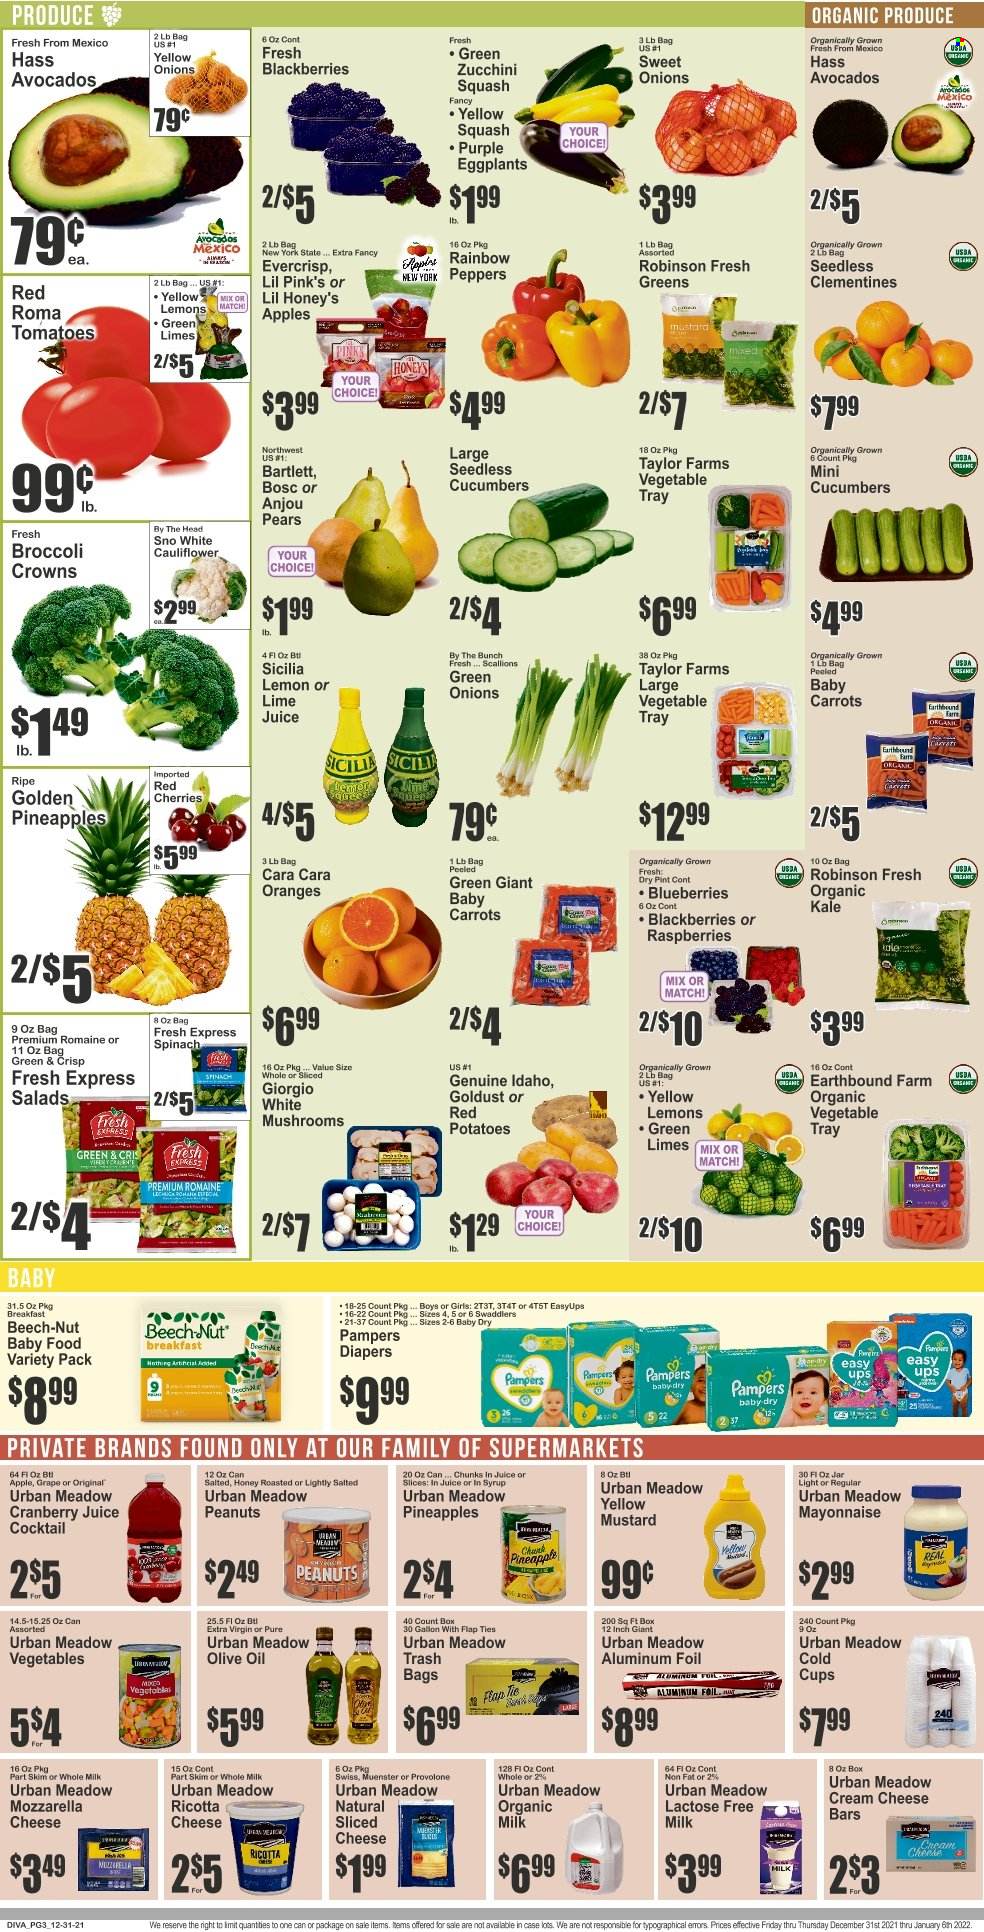 thumbnail - Key Food Flyer - 12/31/2021 - 01/06/2022 - Sales products - mushrooms, carrots, cauliflower, cucumber, spinach, tomatoes, zucchini, kale, potatoes, peppers, eggplant, green onion, red potatoes, yellow squash, apples, avocado, blackberries, limes, pineapple, pears, oranges, cream cheese, mozzarella, ricotta, sliced cheese, cheese, Münster cheese, Provolone, organic milk, lactose free milk, mayonnaise, mustard, extra virgin olive oil, olive oil, honey, peanuts, cranberry juice, Pampers, nappies, trash bags, tray, cup, clementines, lemons. Page 3.